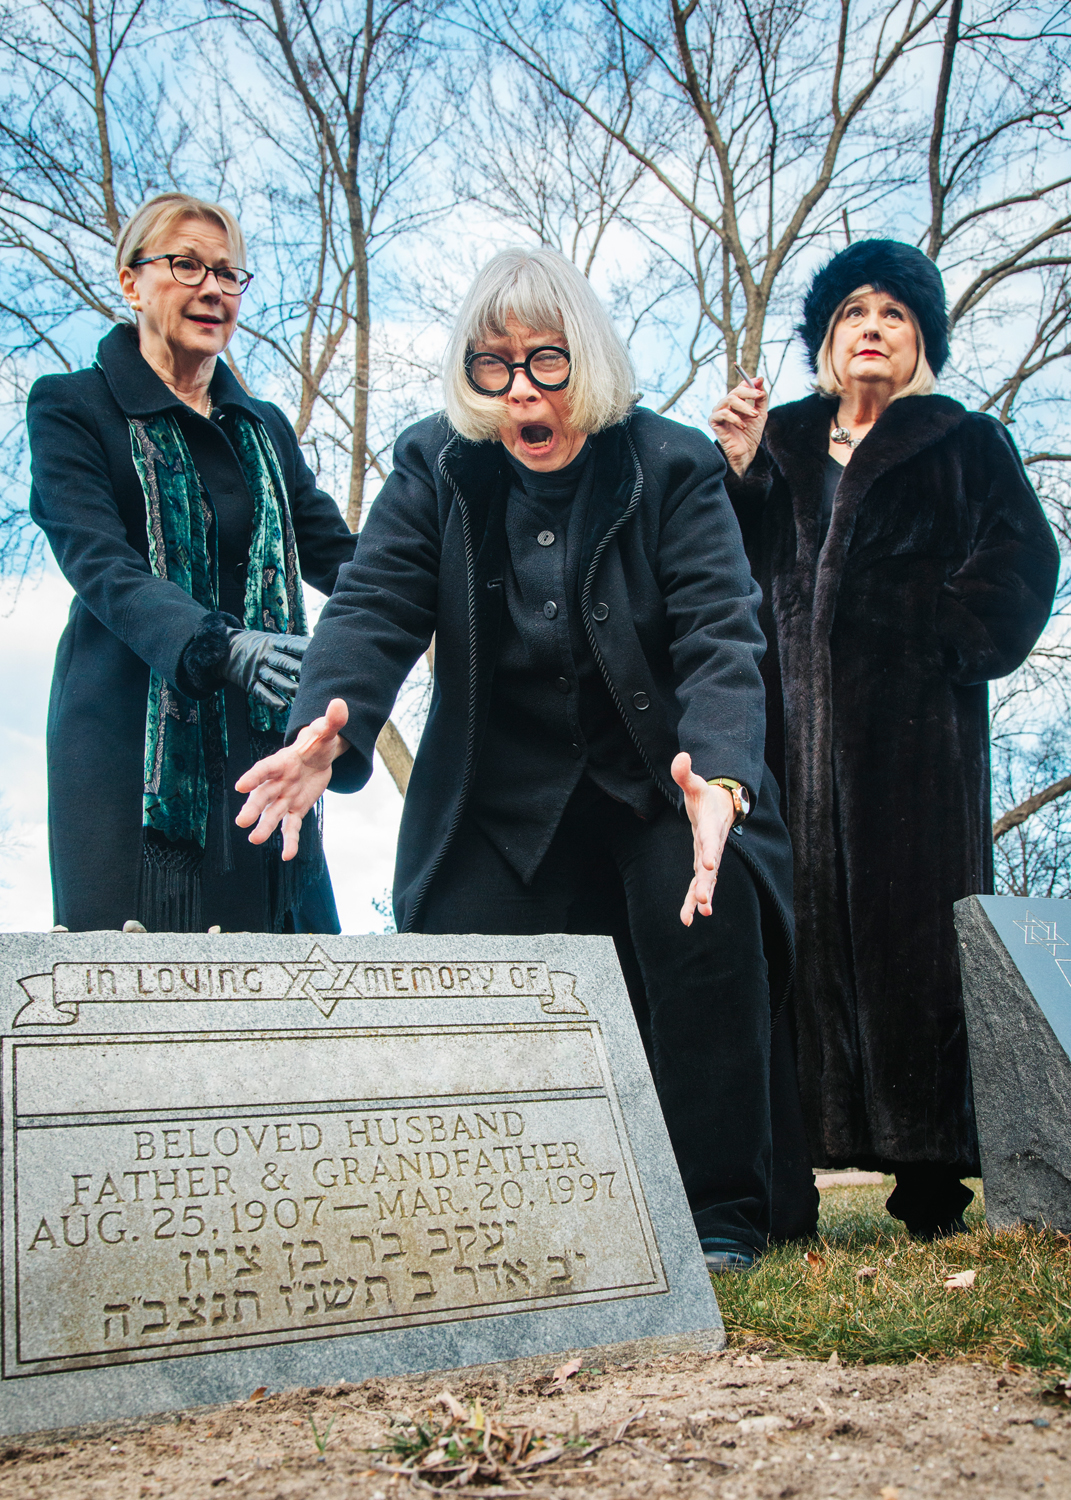 Sally Savoie of Bloomfield Hills, Sandy Mascow of Macomb Twp., and Sue Chekaway of Bloomfield Hills play three widows in the Birmingham Village Players production of The Cemetery Club, weekends March 